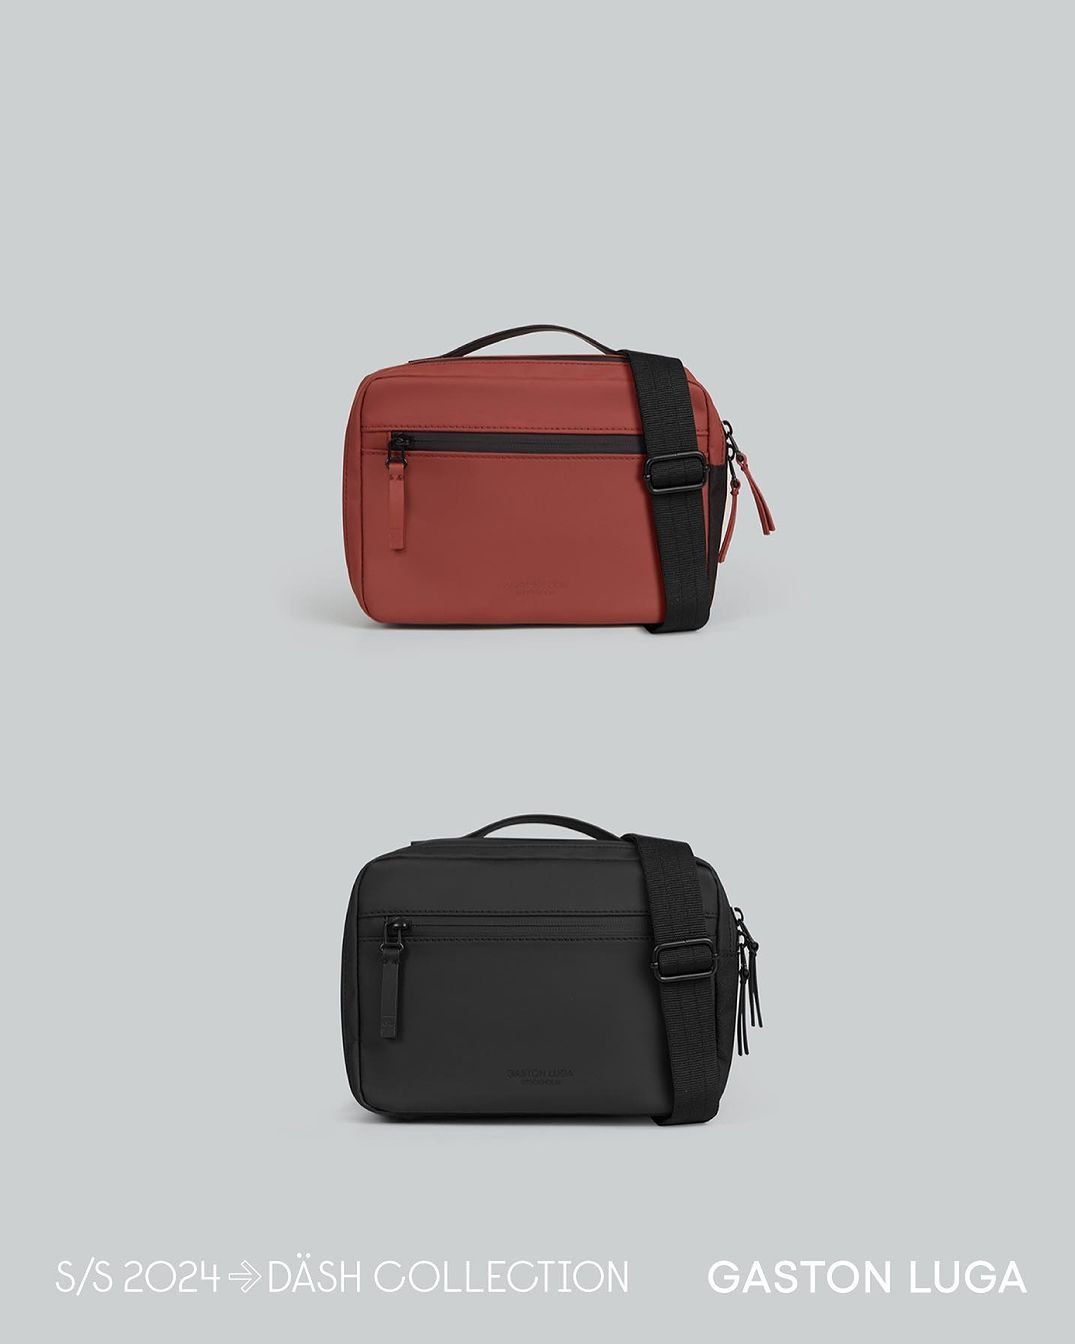 The box bag is the ideal travel companion to store all your essentials. It comes with a rubber-coated handhold strap and a detachable woven strap that allows you to wear it horizontally or vertically based on your preference. Available in all our online stores at gastonluga.com :)#gastonluga